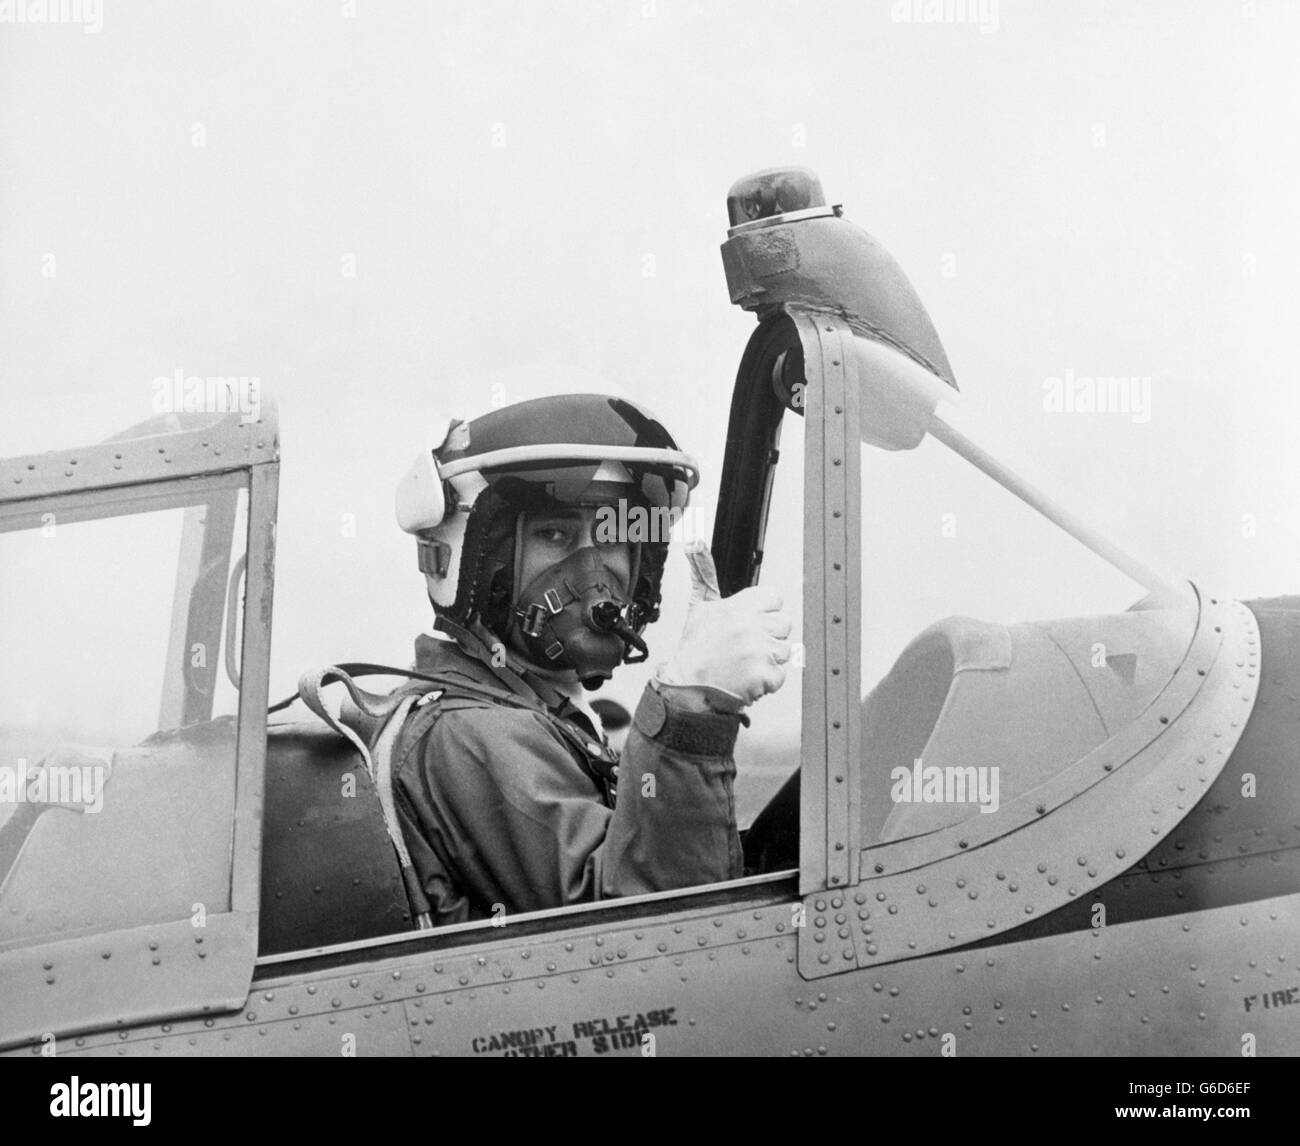 Prince Charles in the cockpit of a Chipmunk aircraft before flying from RAF Oakington in Cambridgeshire. He was accompanied by flying instructor Philip Pinney. Stock Photo